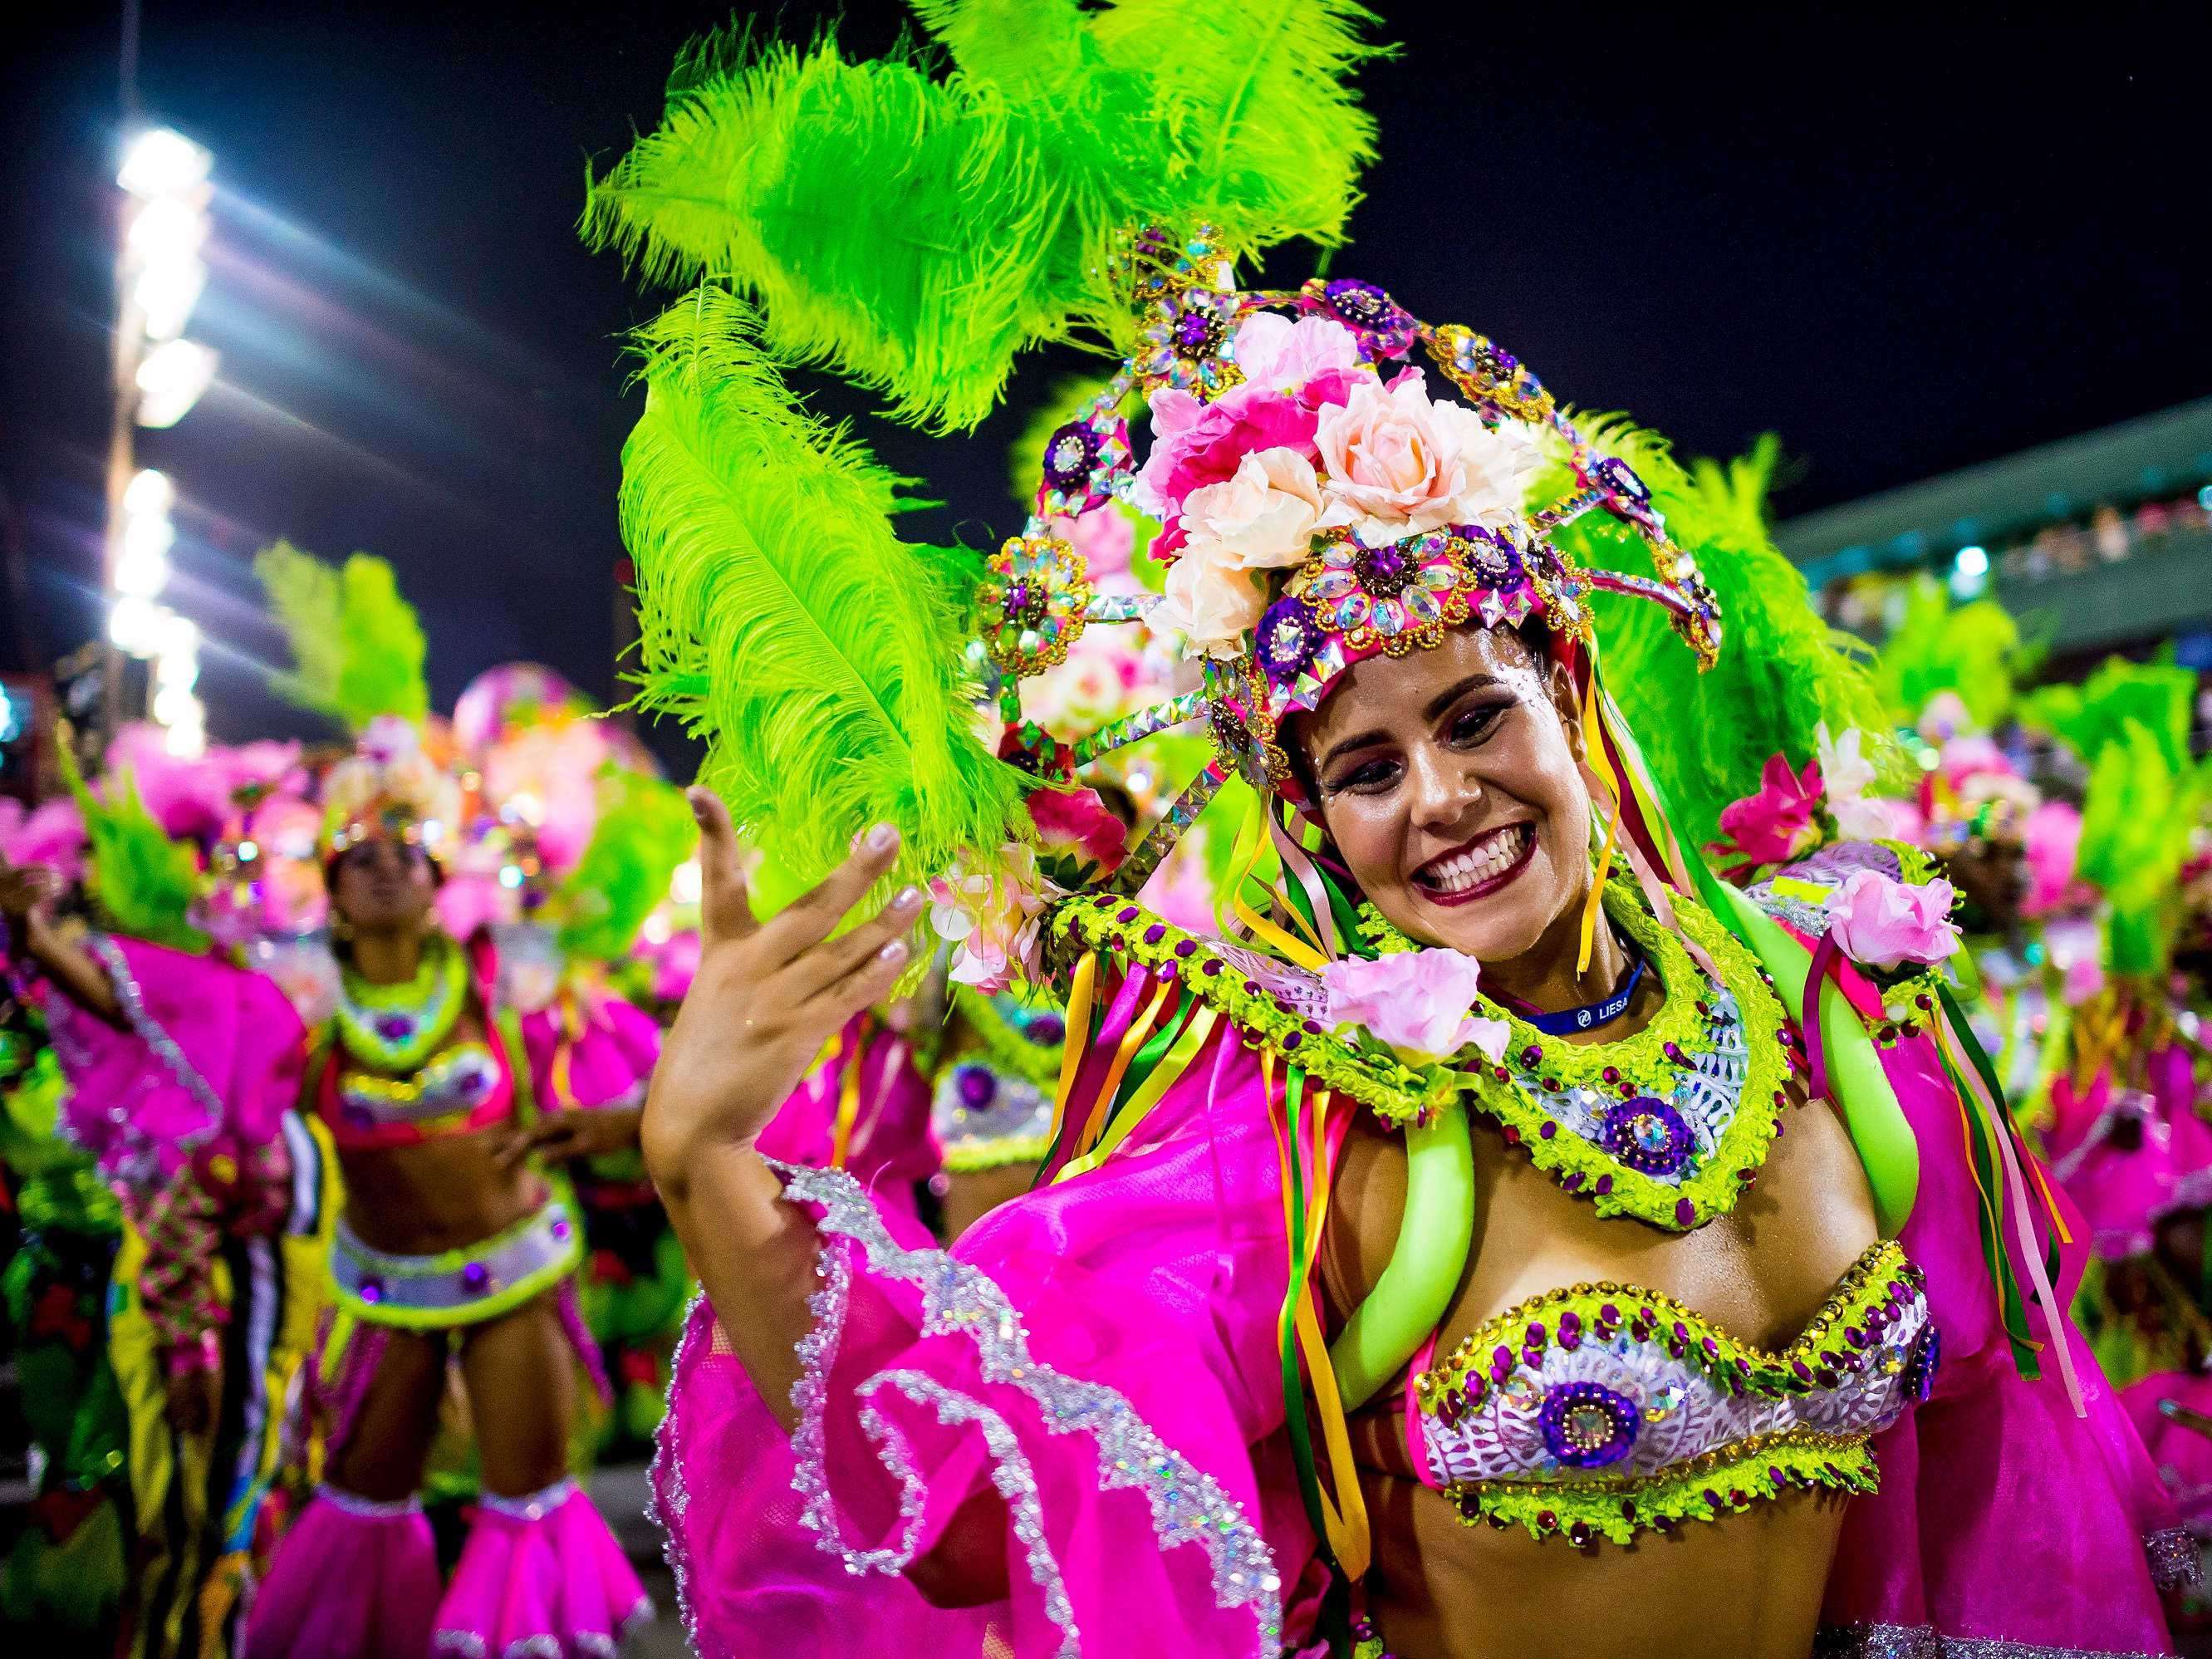 Rio de Janeiro, Brazil, hosts the biggest carnival in the world with